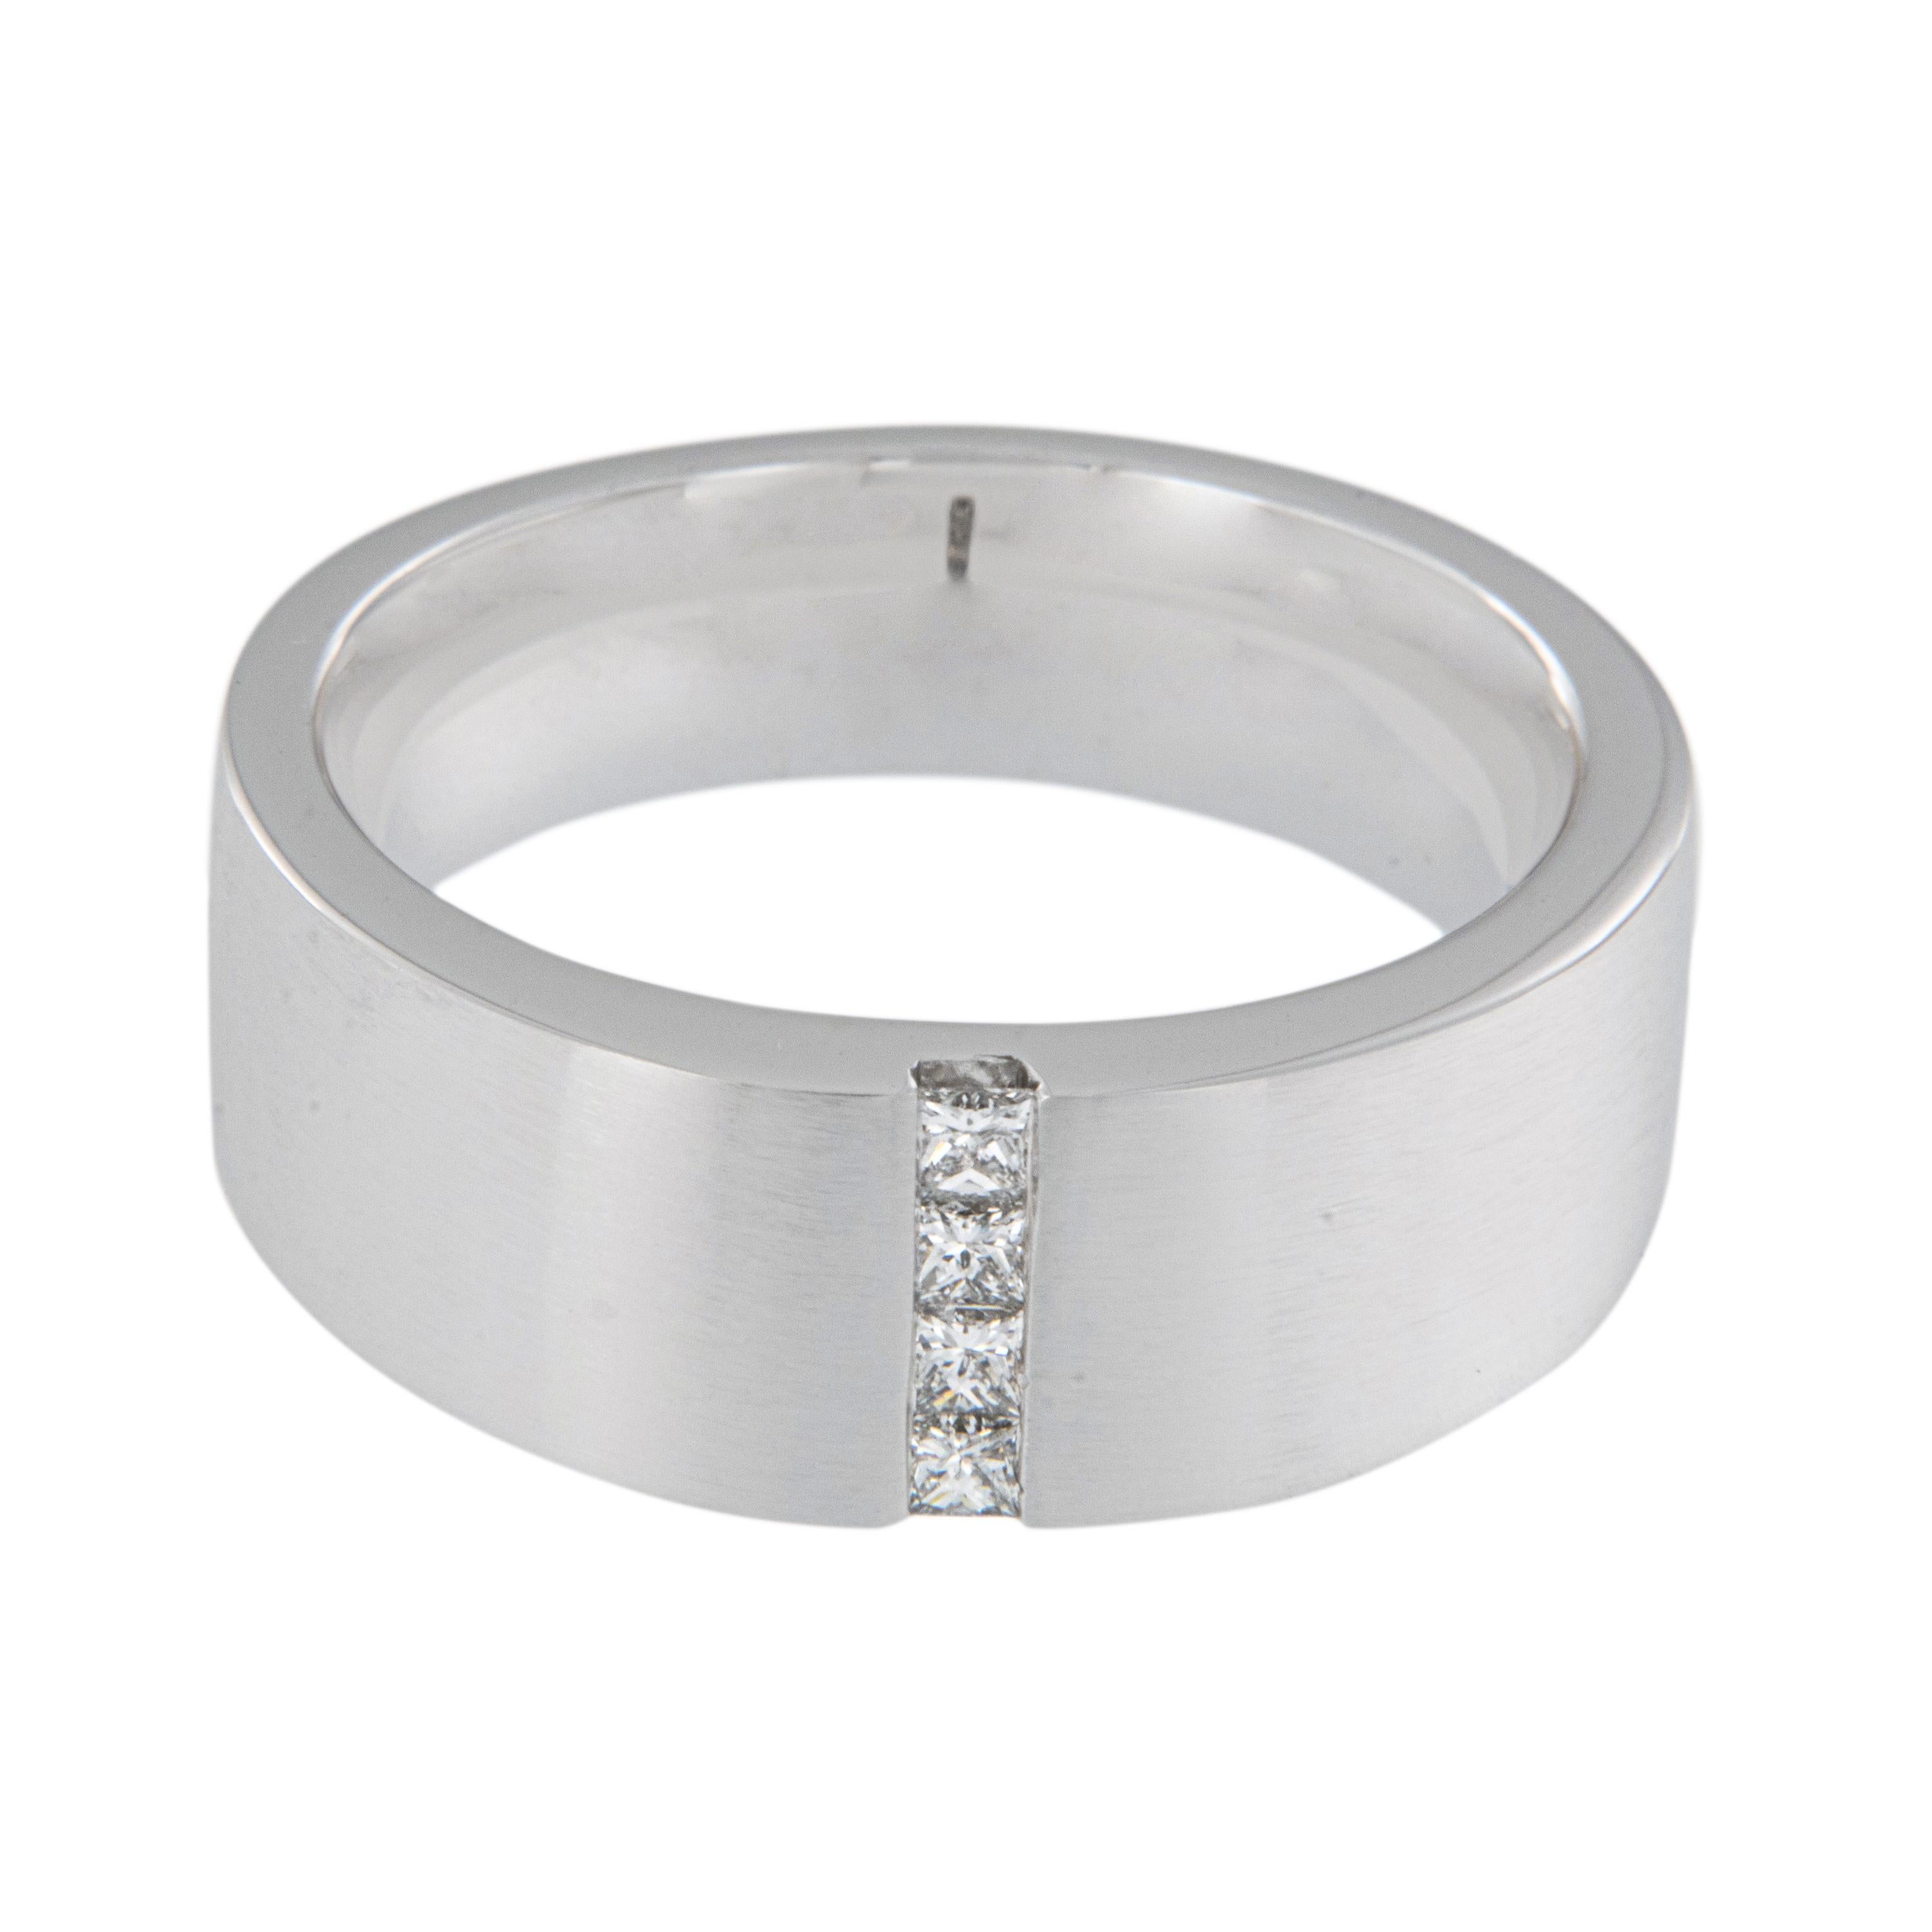 Everybody loves a sharp dressed man! And you will definitely be sharp dressed wearing this 14 karat white gold band accented with 4 princess cuts = 0.24 Cttw in a size 9.5 but can be sized. Handsome brushed finish for a subtle look with a comfort